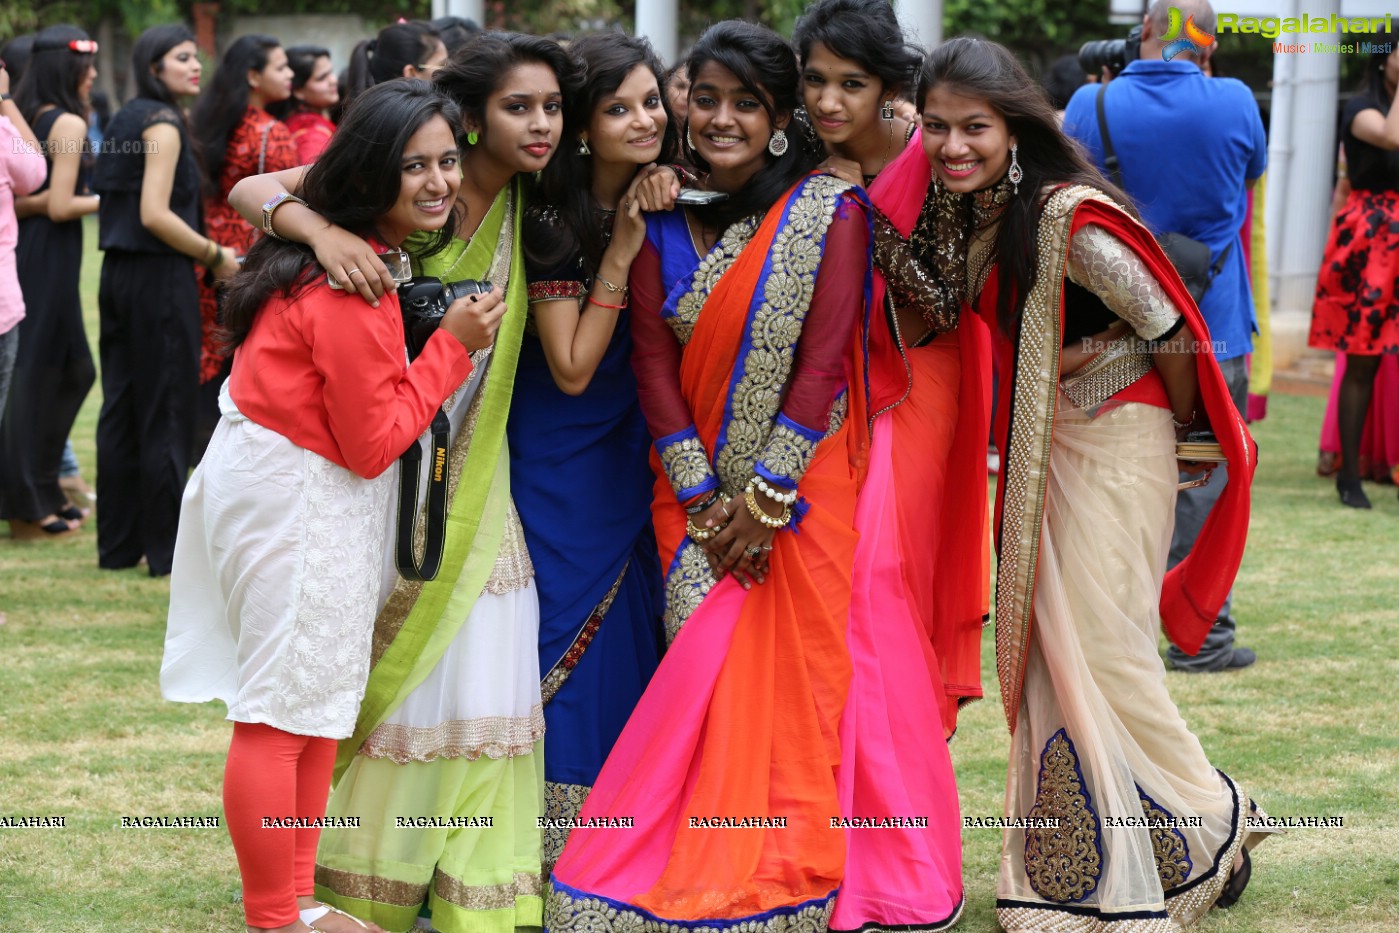 Villa Marie Degree College for Women Freshers Party 2015 at Bantia Garden, Hyderabad